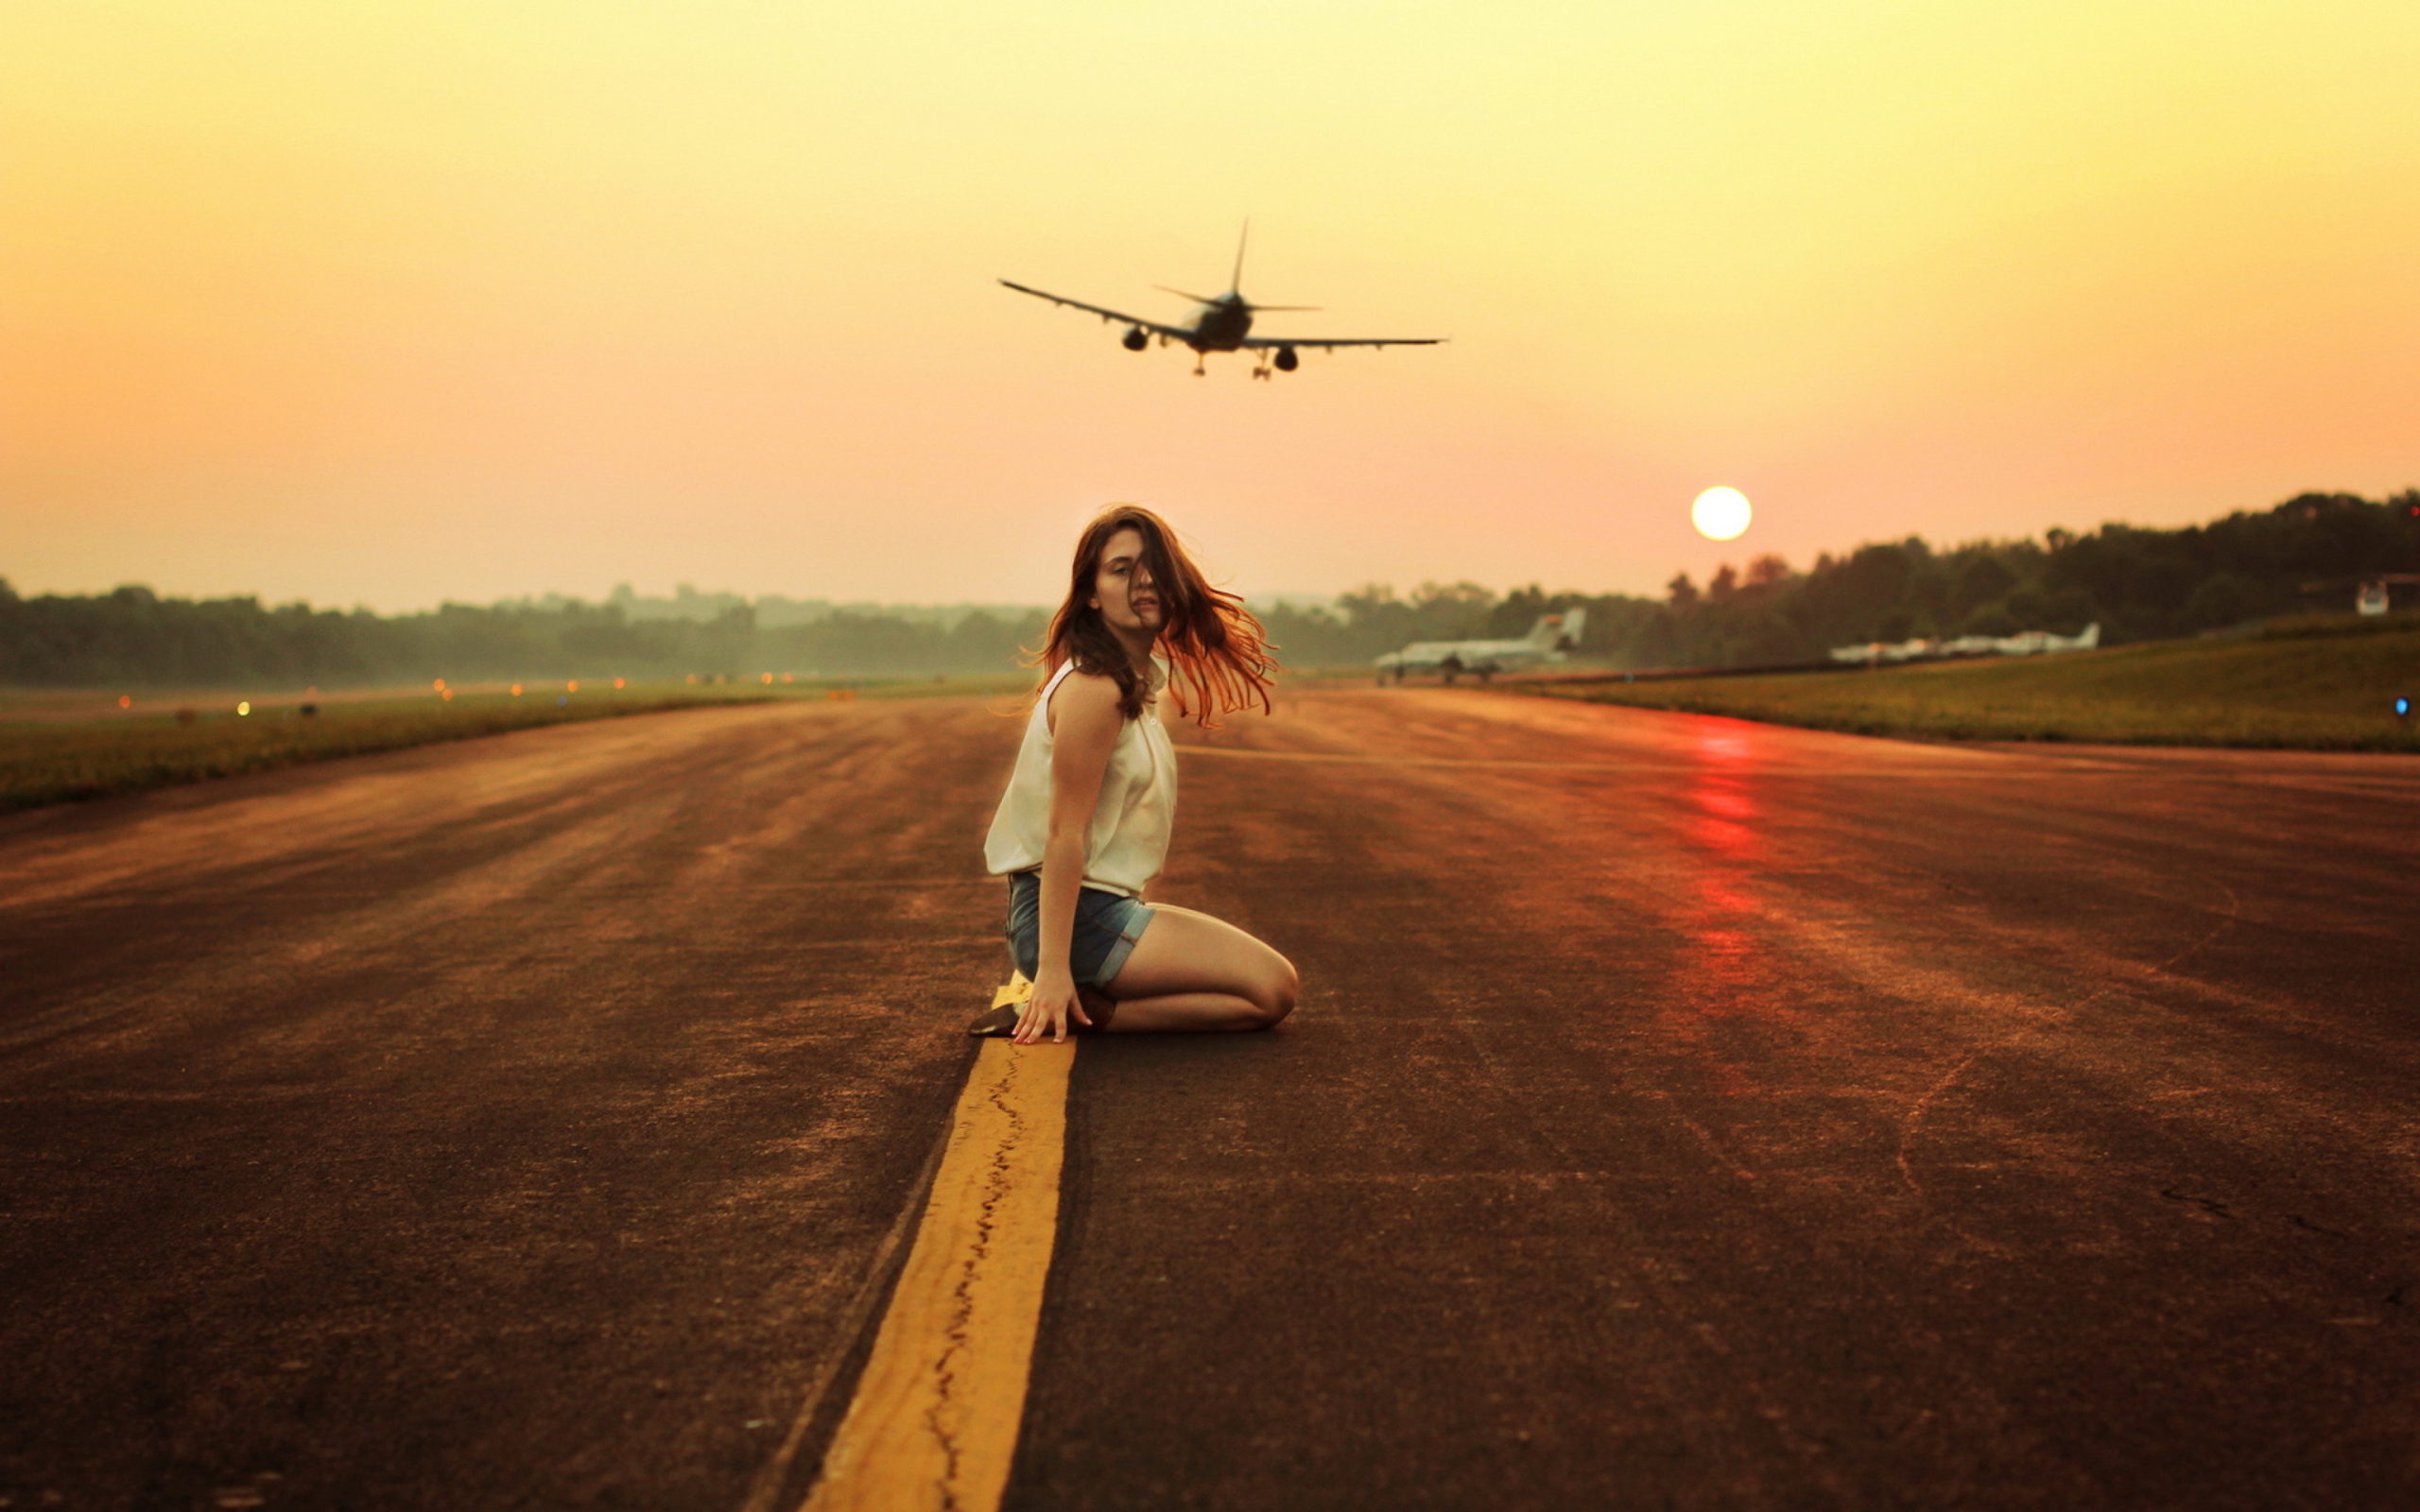 Airplane Over Girl's Head wallpaper 2560x1600